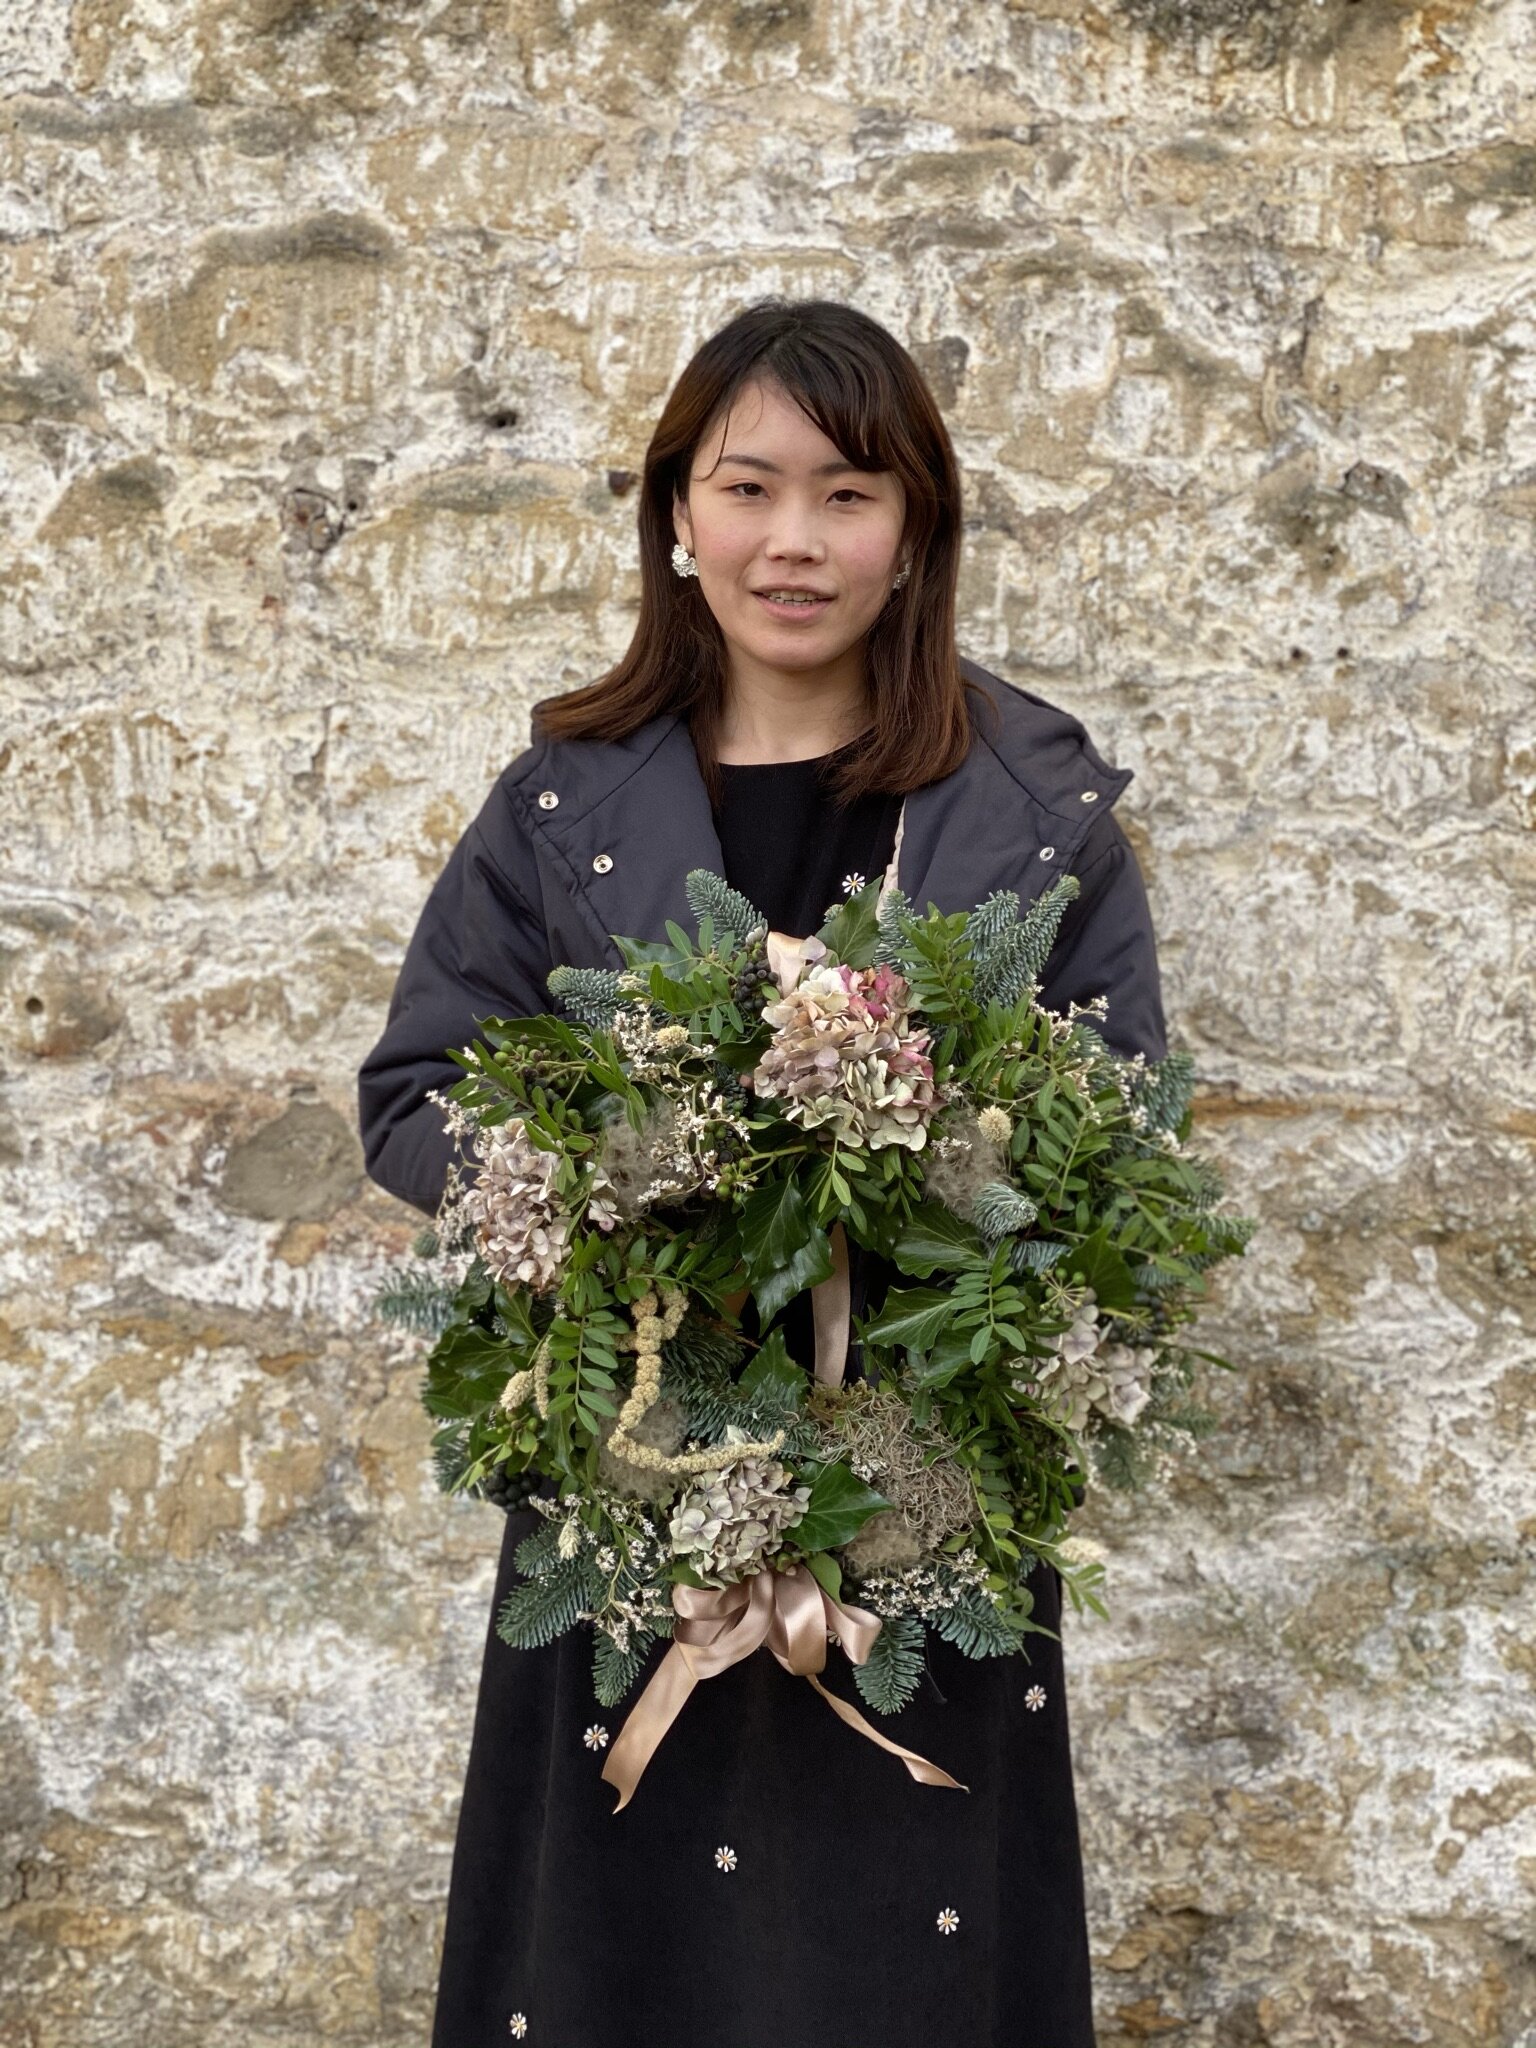 Hedgerow inspired Christmas wreath being held by student in front of a brick wall (Copy)